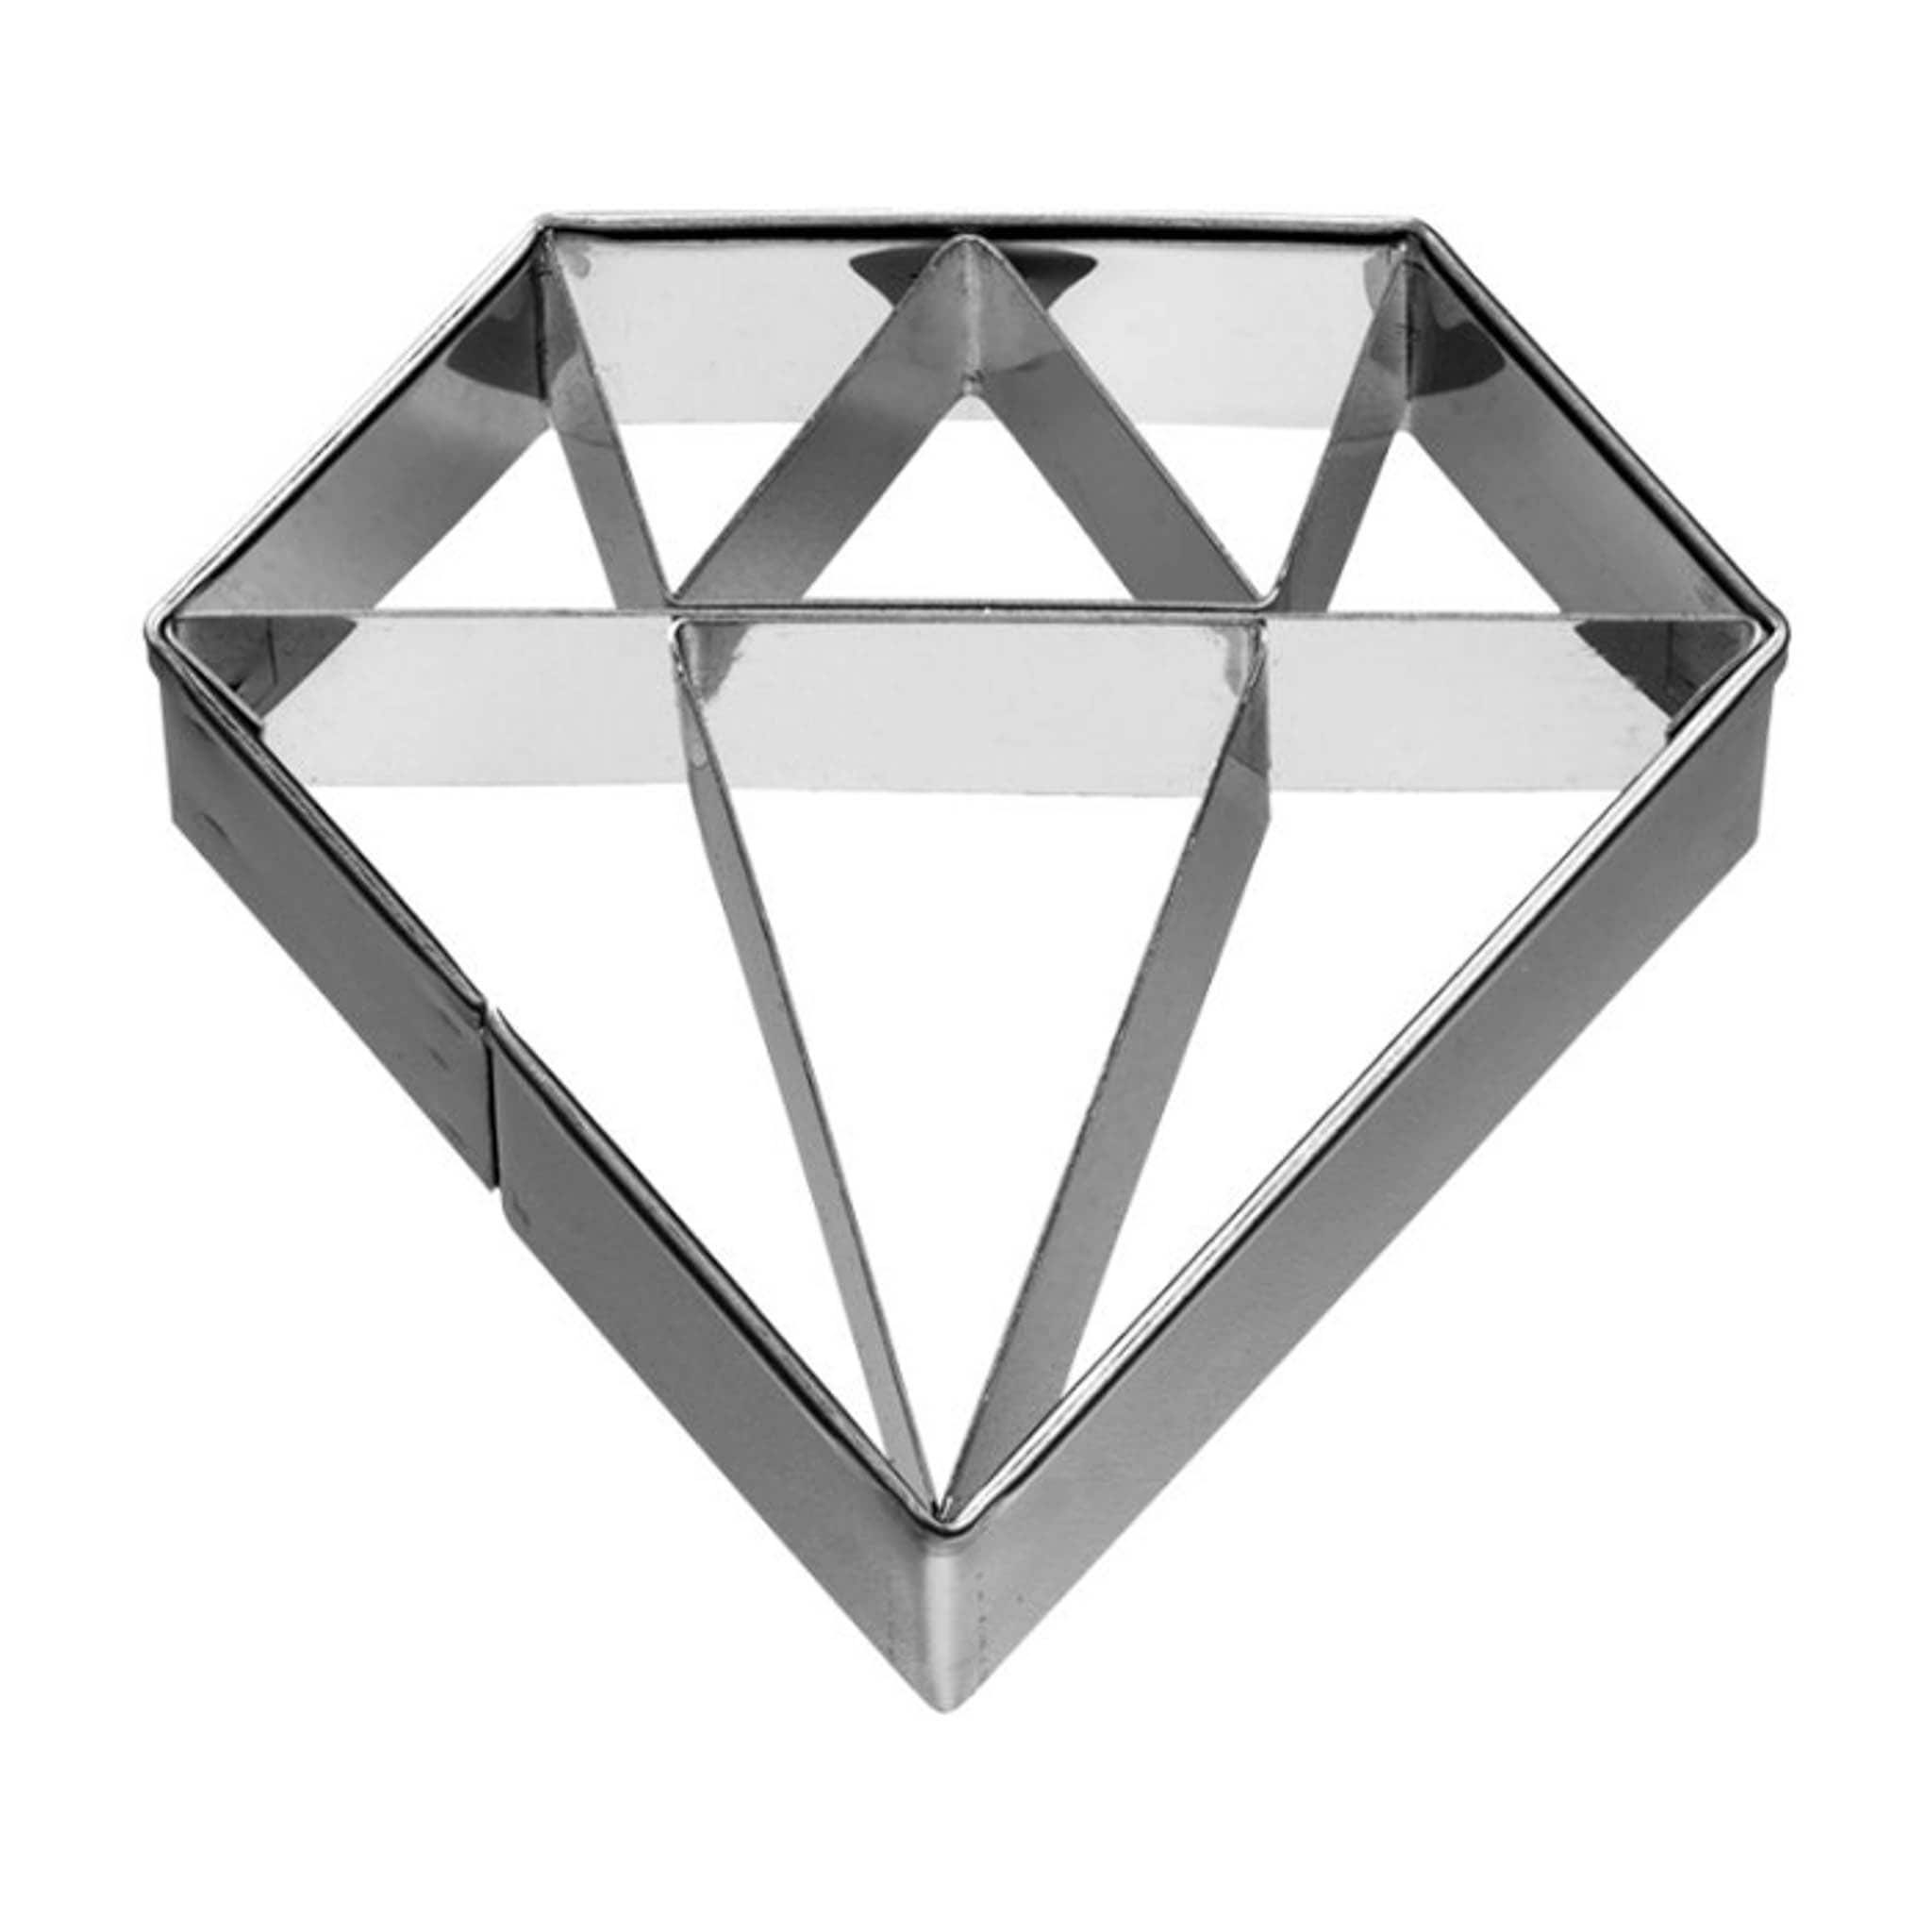 Stainless Steel Diamond Cookie Cutter, 6cm